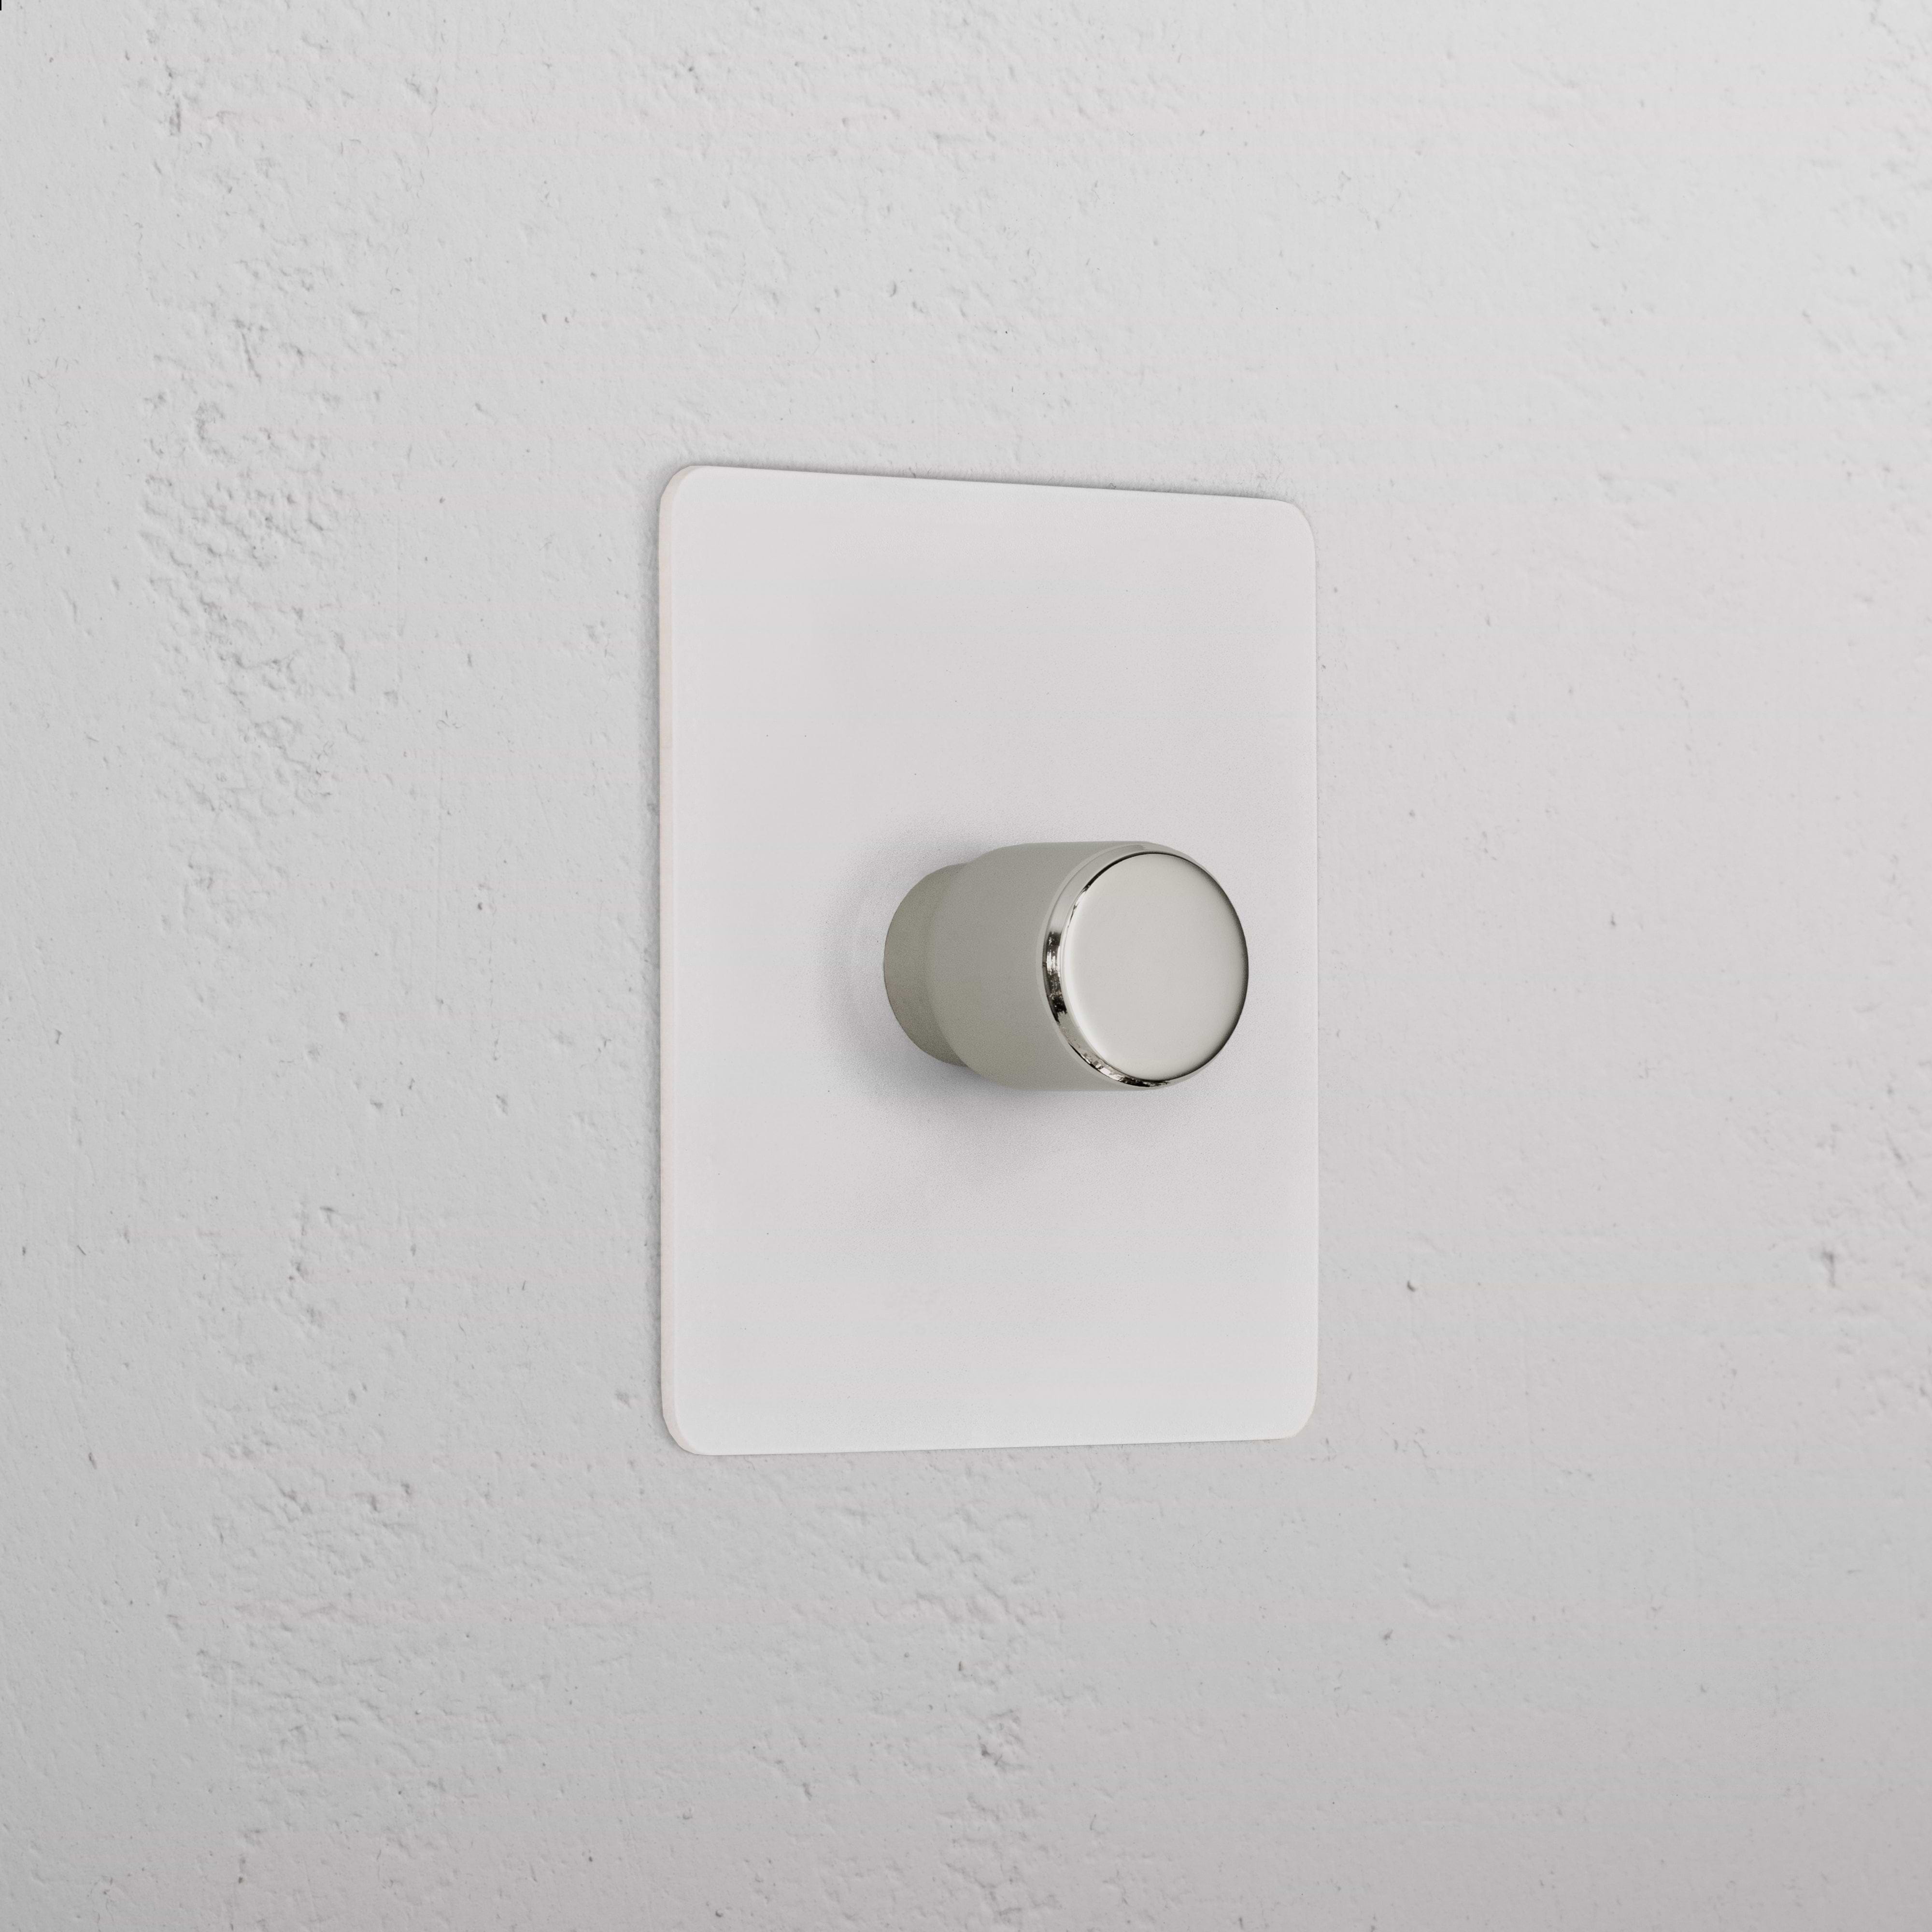 1G Dimmer Slimline Switch - Paintable Polished Nickel